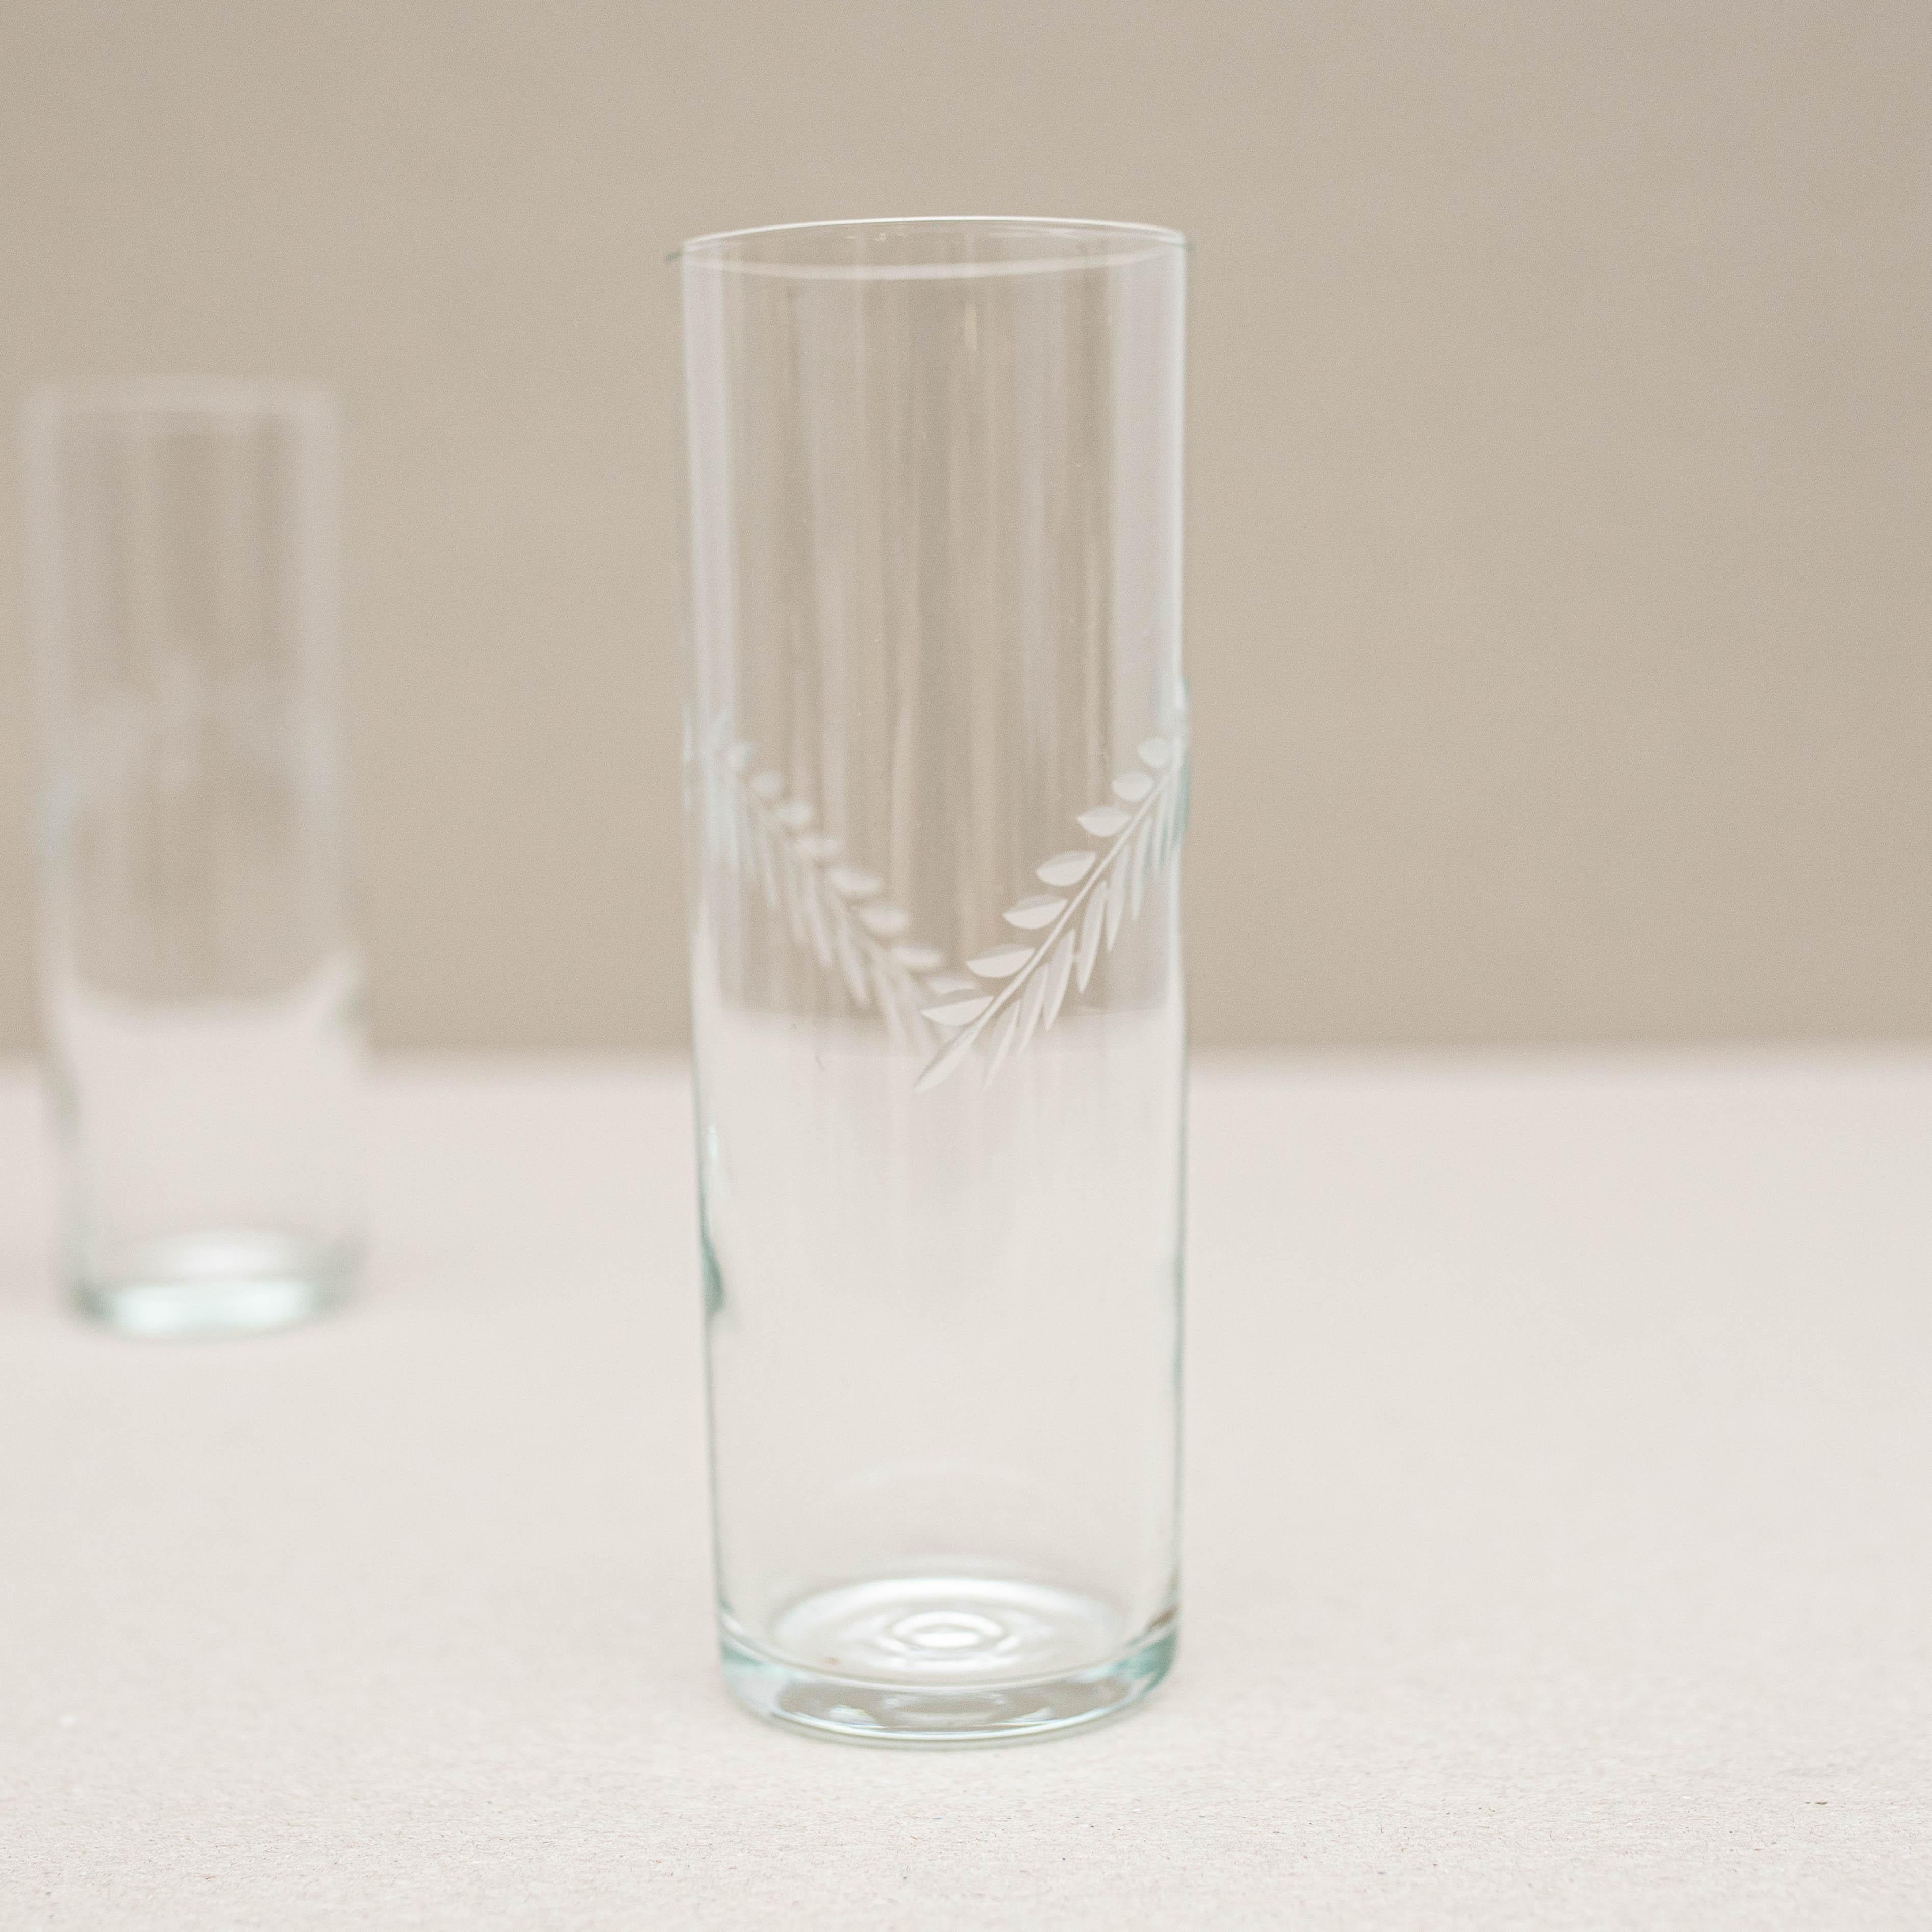 Set of 3 Antique Crystal Glasses, circa 1970 For Sale 5